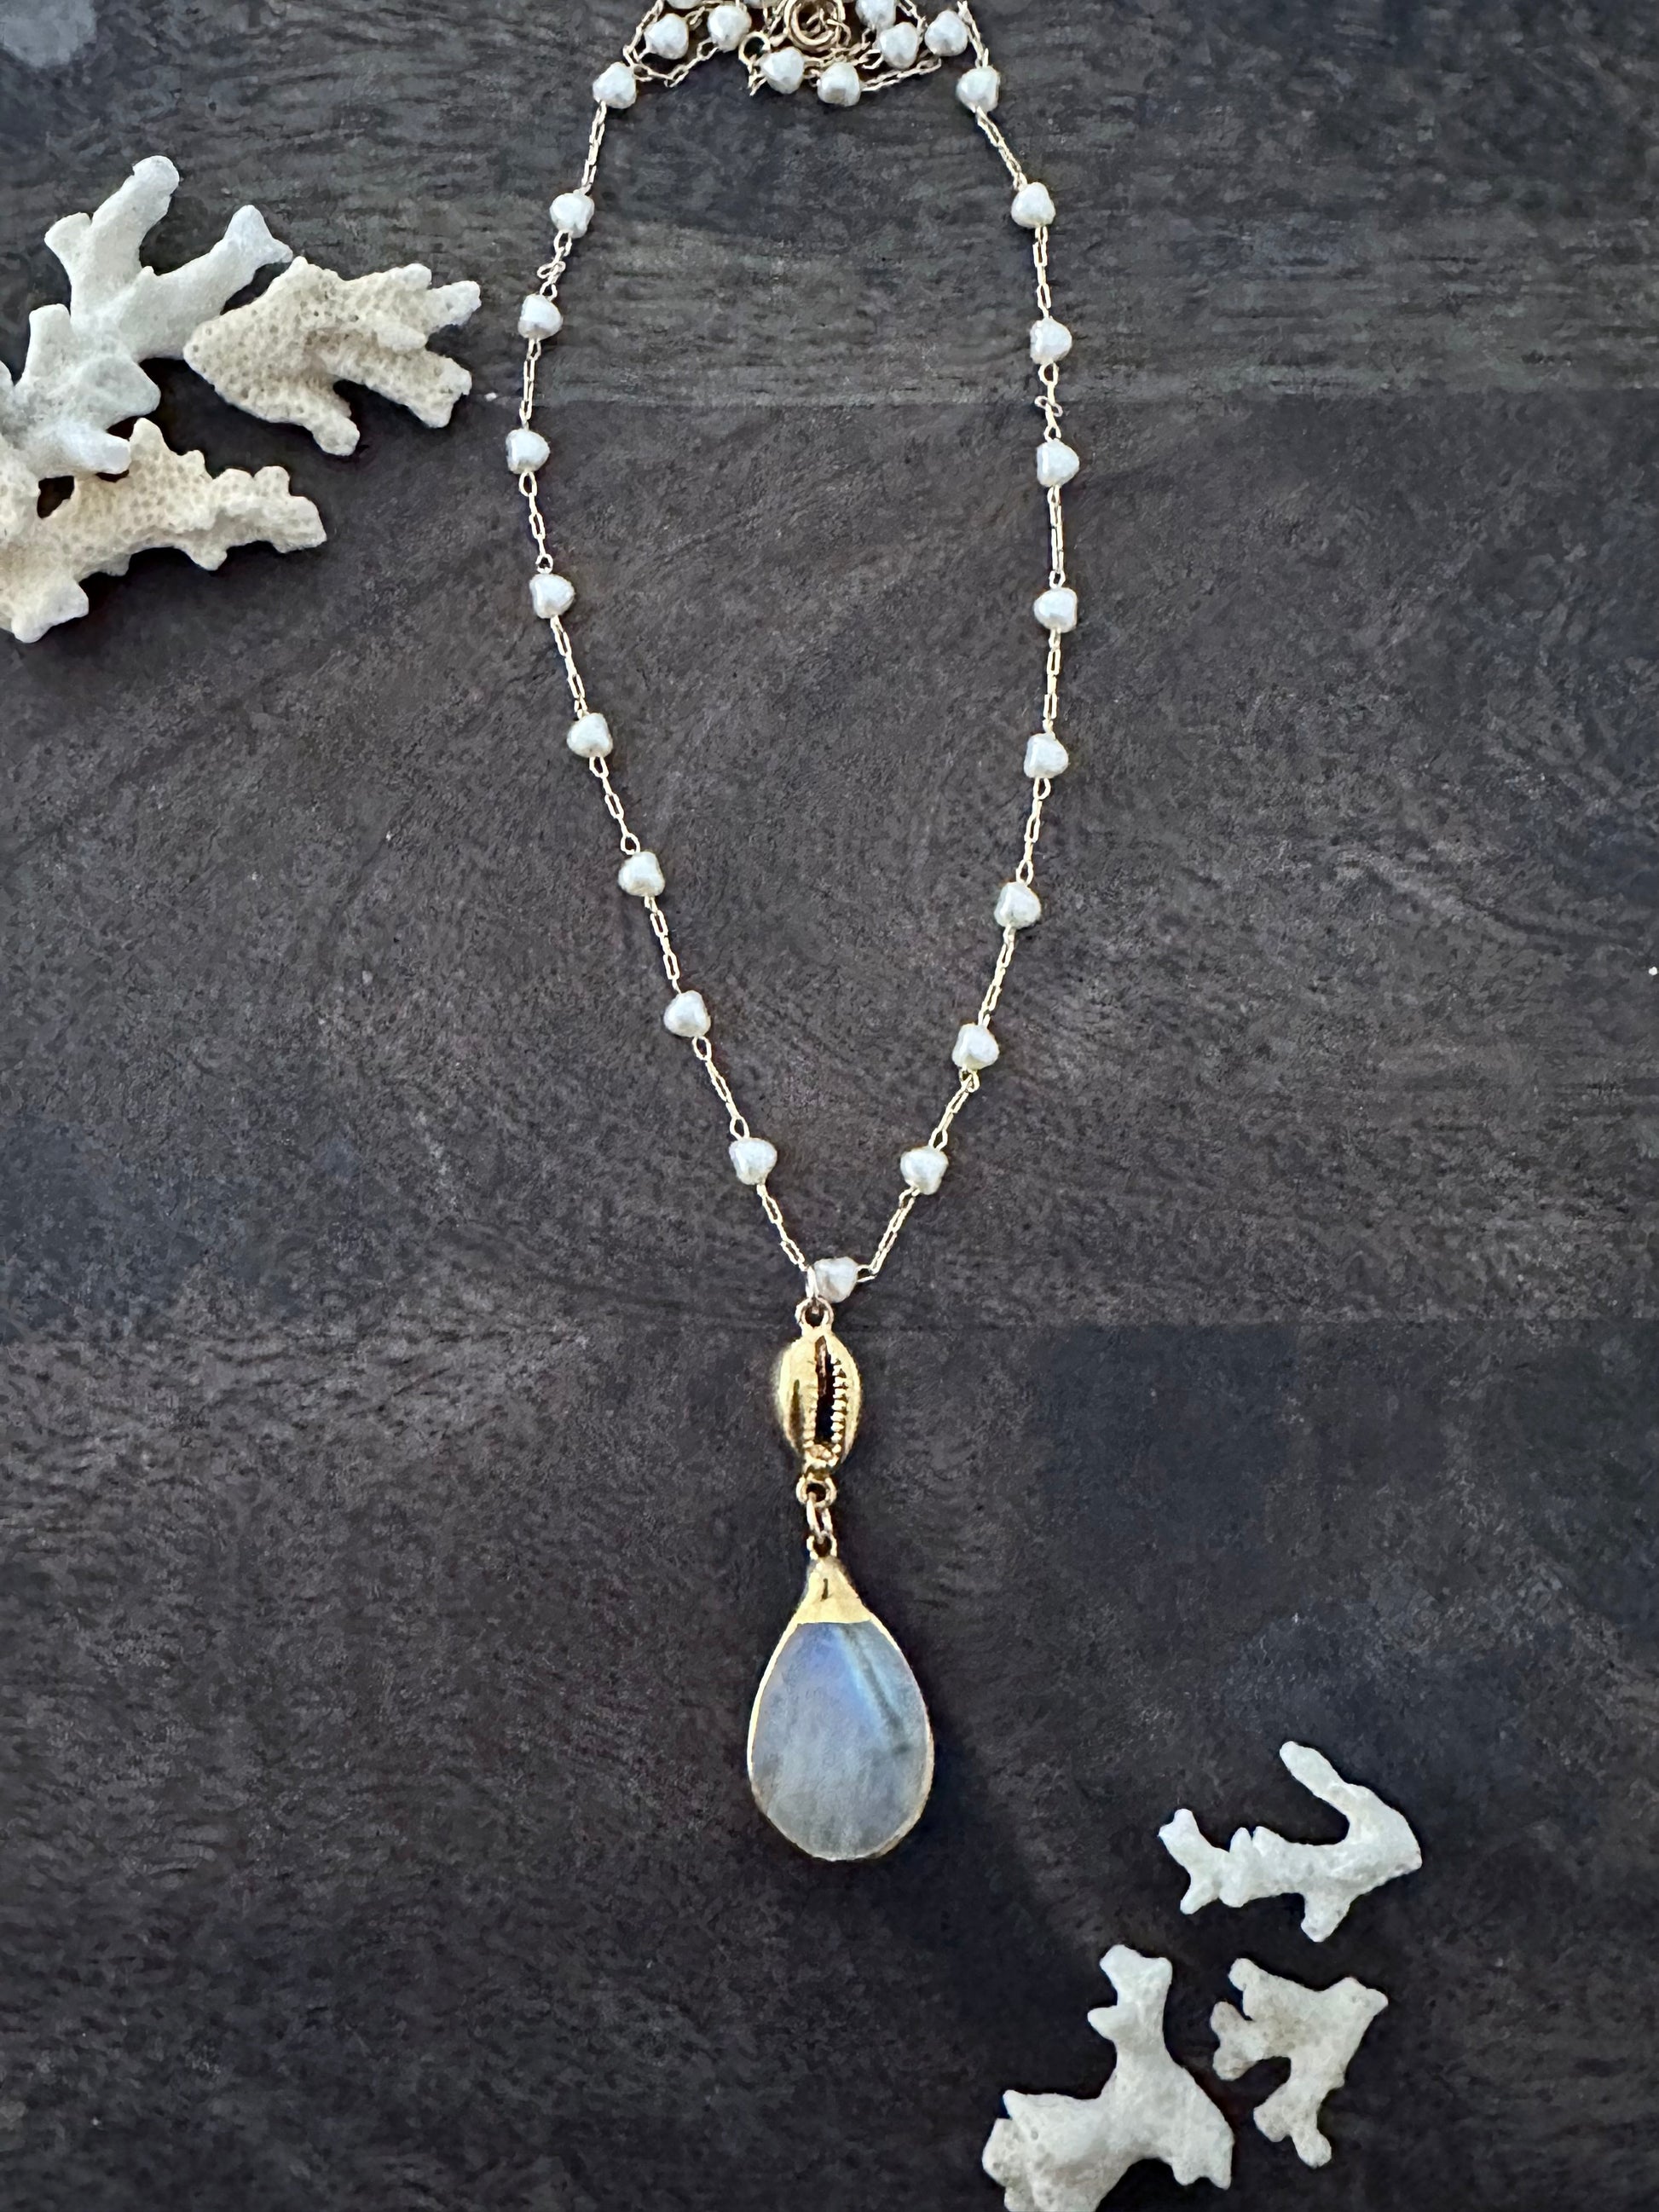 Necklace with a rainbow moonstone pendant with a gold cowie shell above it on a 18" necklace with white heart shaped pearls on a wooden background with white coral pieces in the upper left and lower right corners